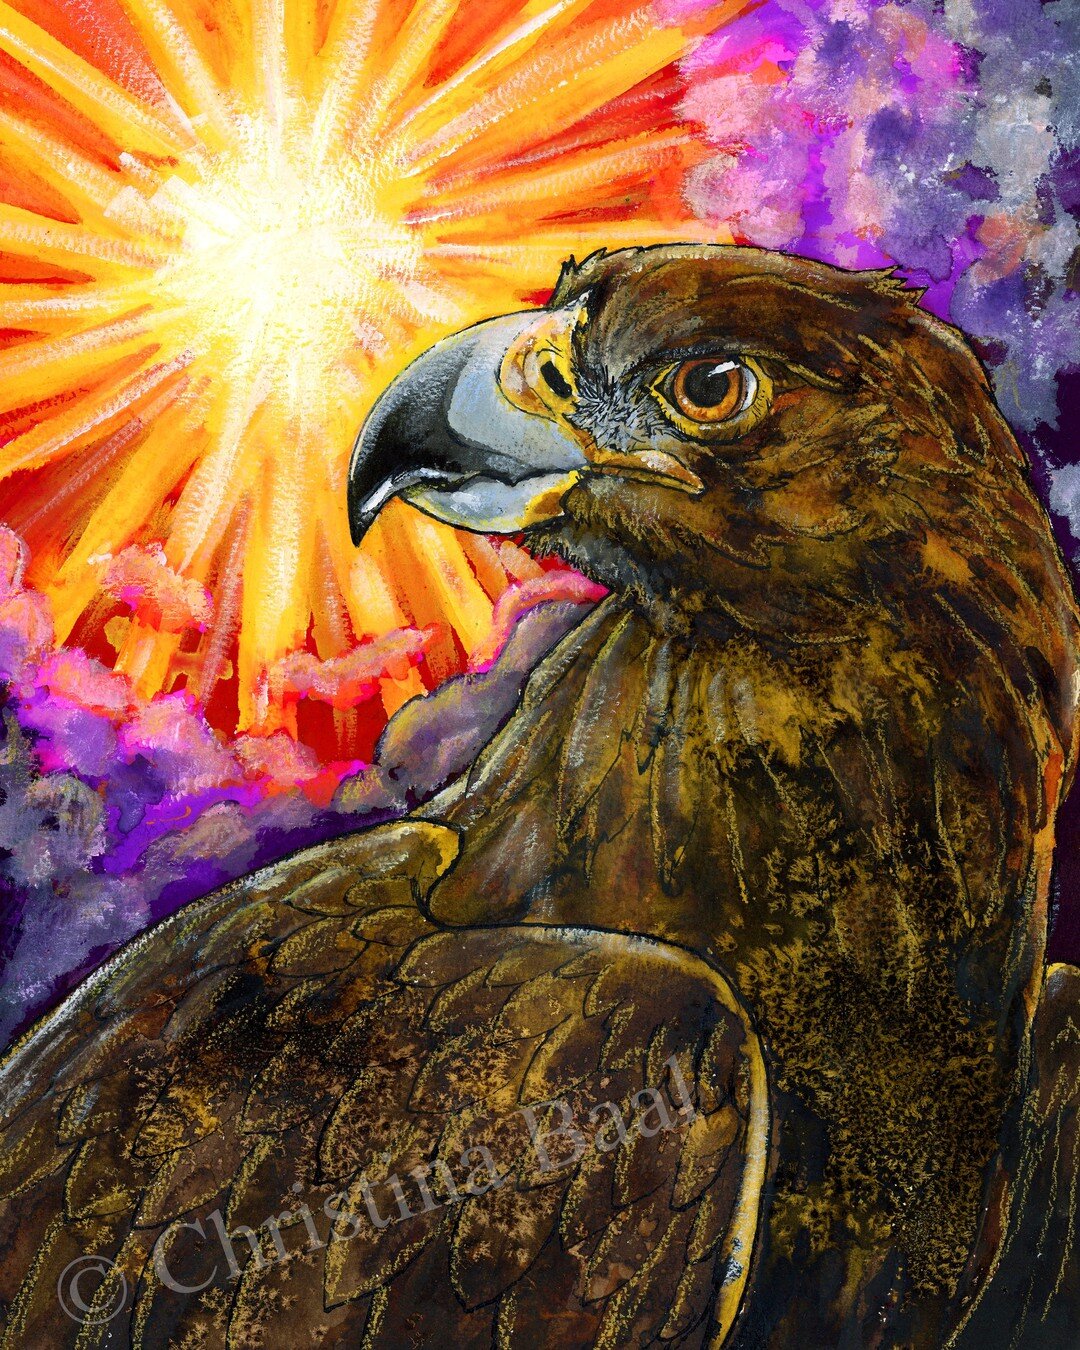 Septmember 12, 2022: Golden Eagle

Golden Eagles are powerful, majestic birds that are symbols of royalty and strength the world over. I love seeing them soaring over the central valley of California. I made this painting that I titled &quot;Aquila S